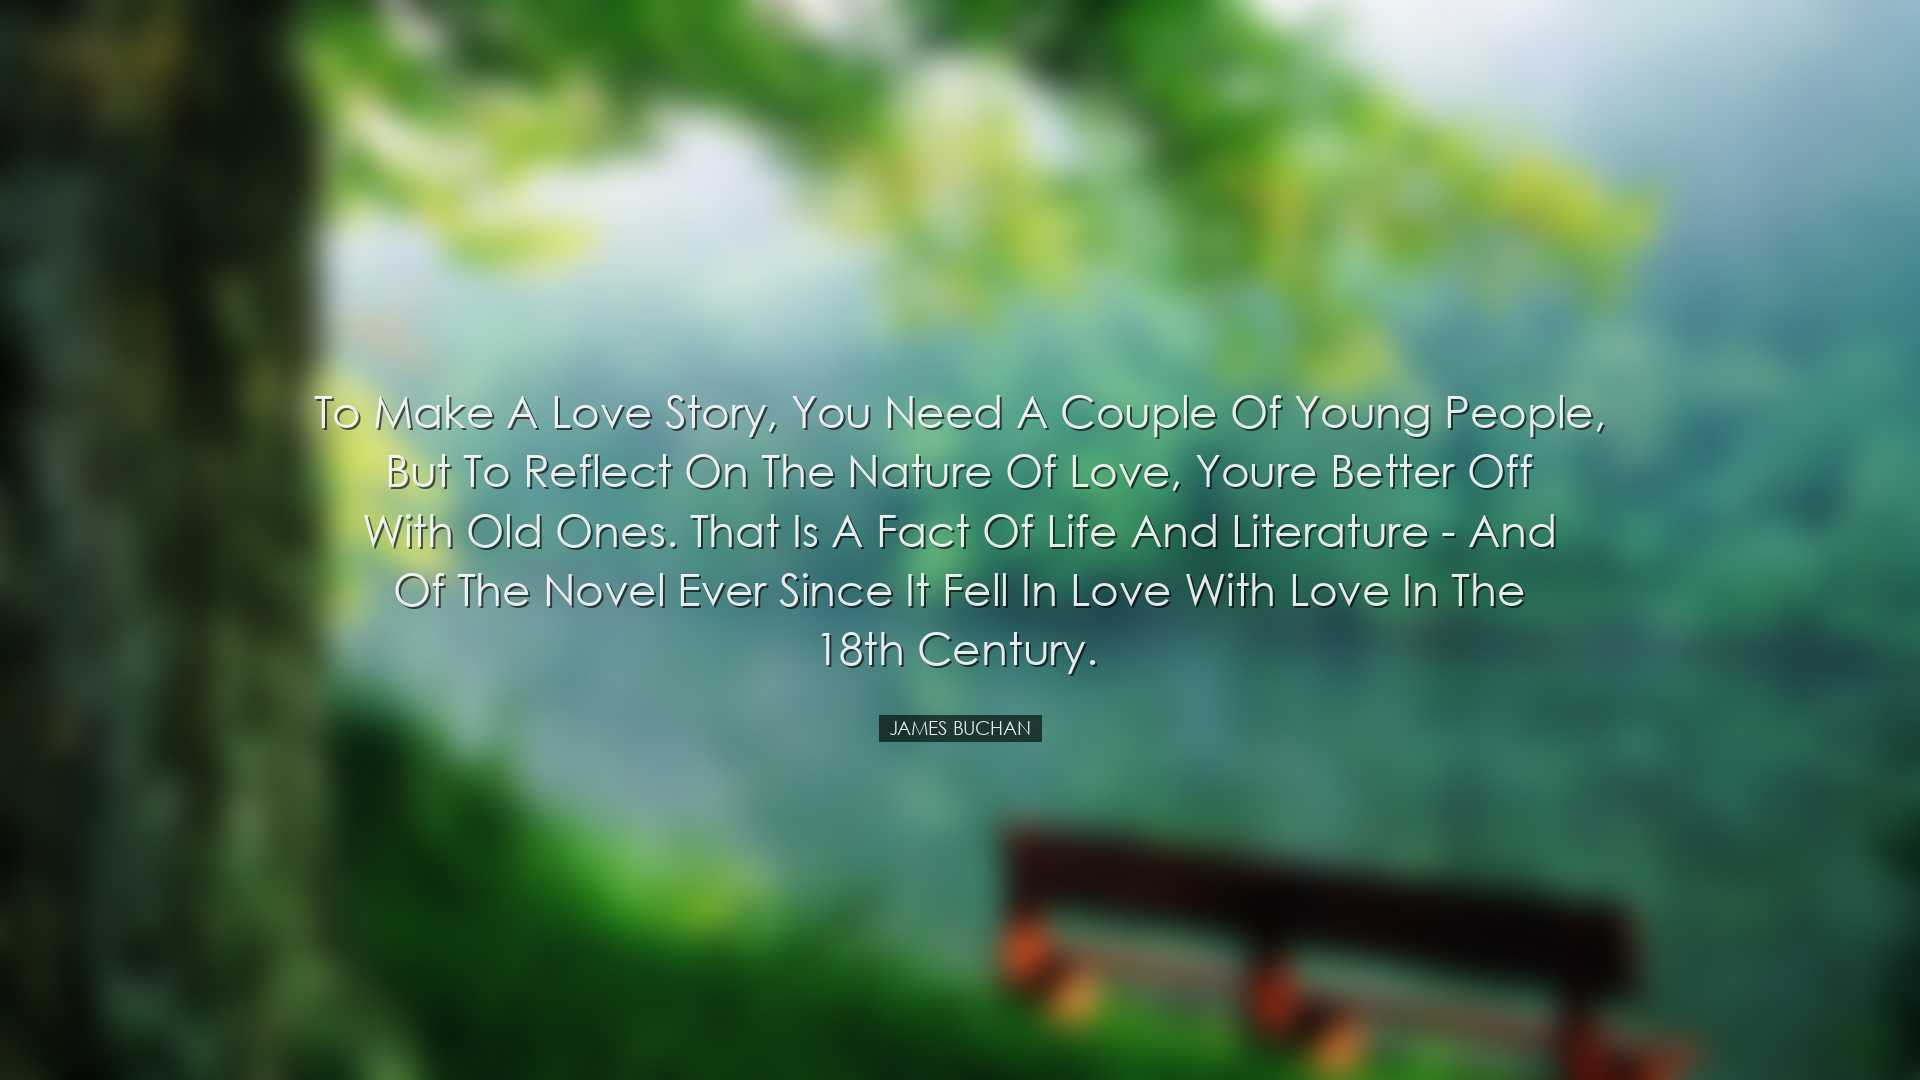 To make a love story, you need a couple of young people, but to re